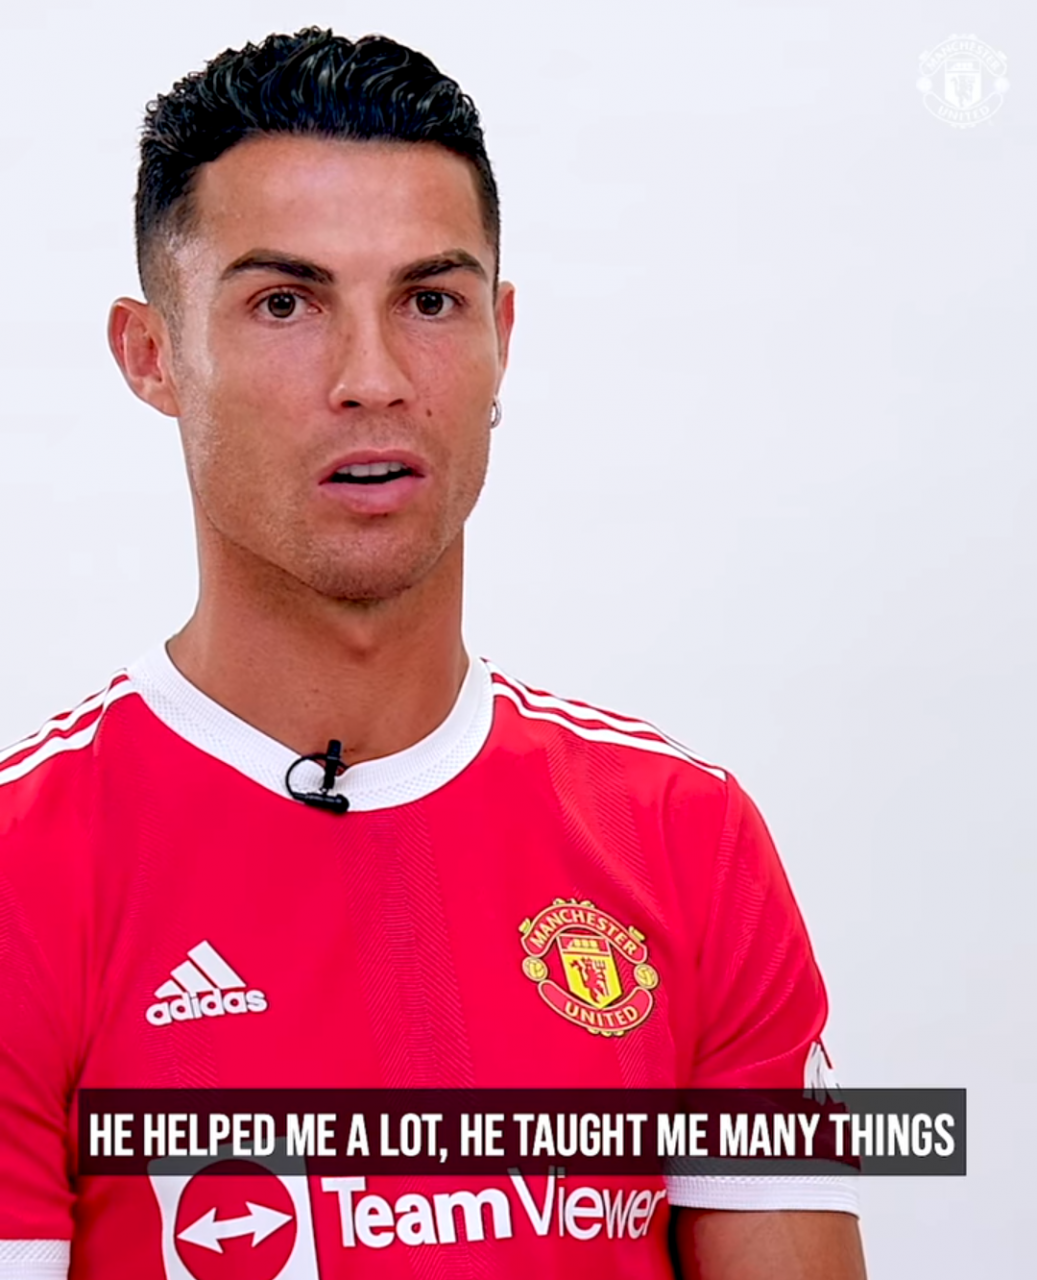 Cristiano Ronaldo explains his son-father relationship with Sir Alex Ferguson in his first interview since re-signing for Manchester United (Video)